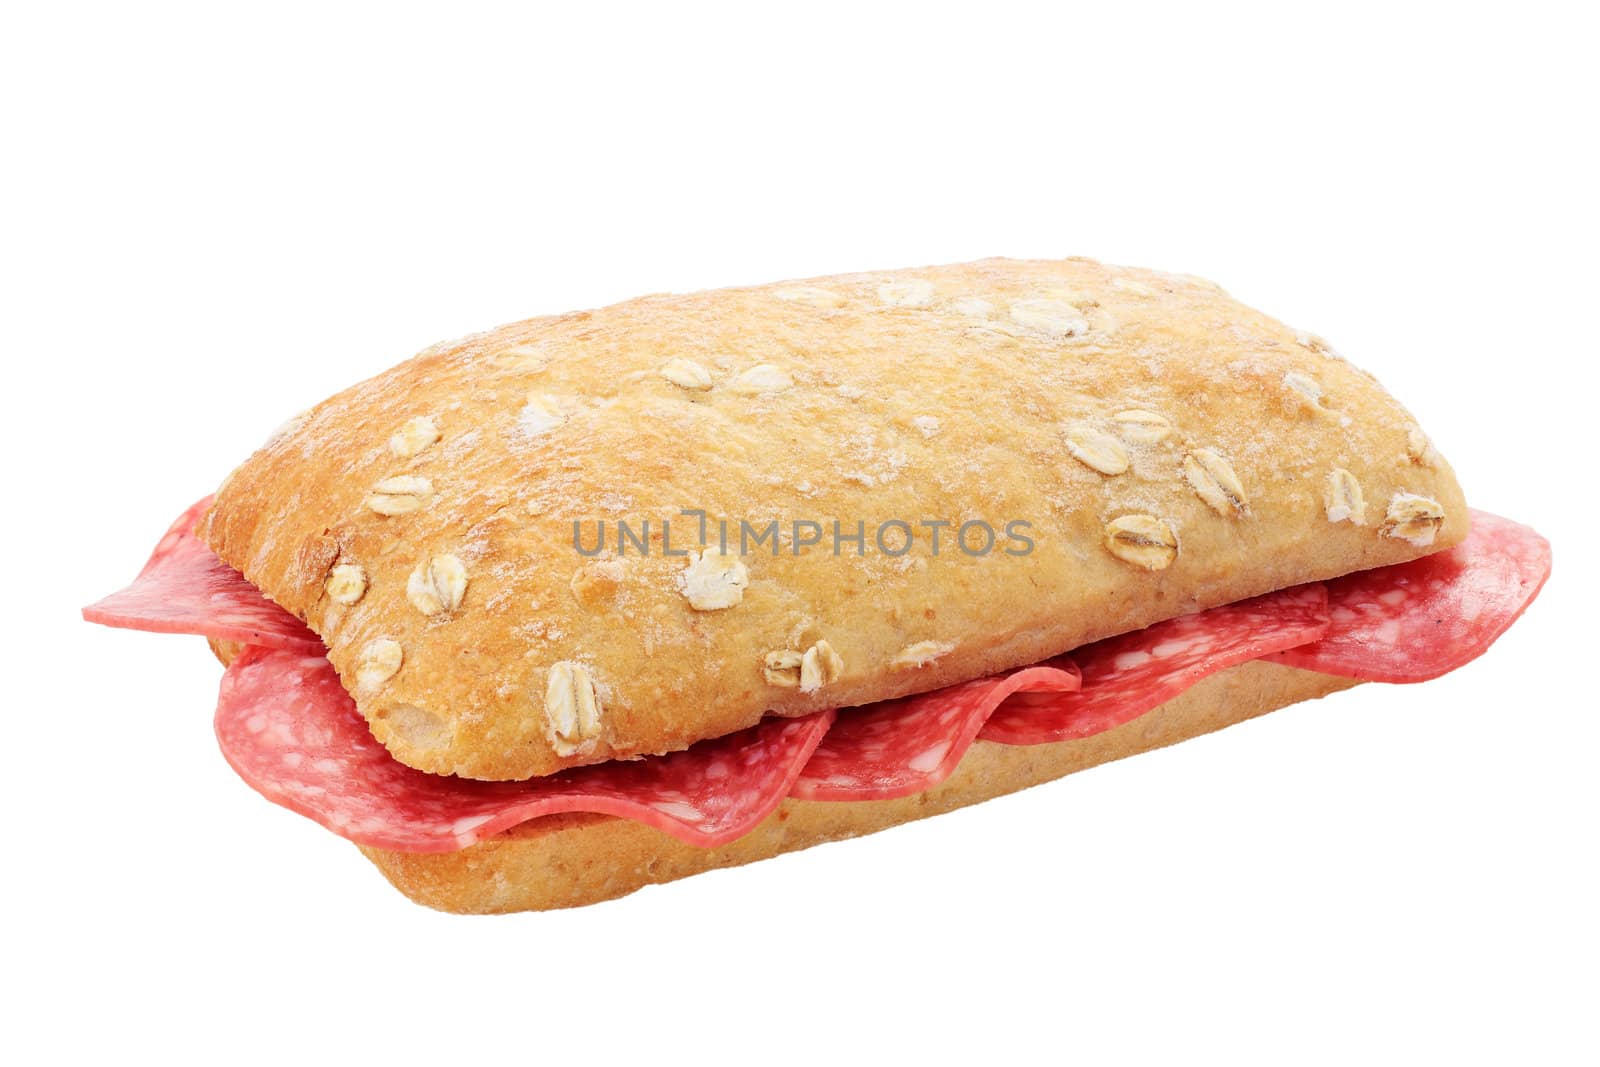  tasty snack of sausage or salami cut off and isolated